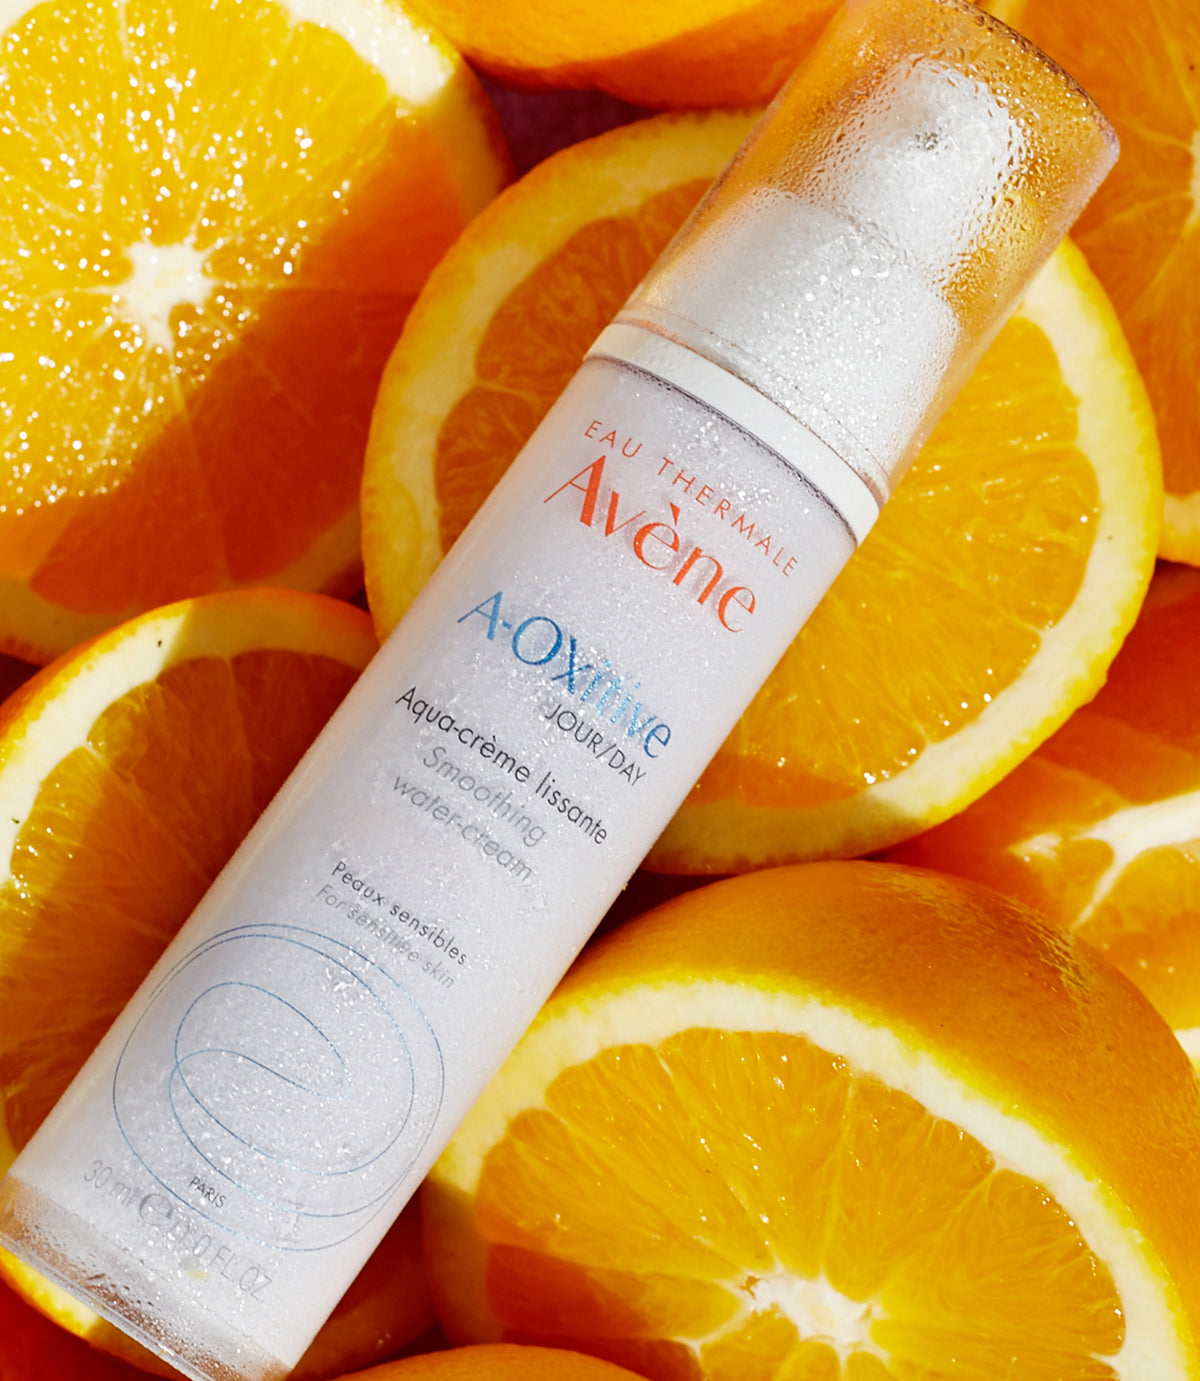 A-Oxitive Smoothing Water-Cream 30ml